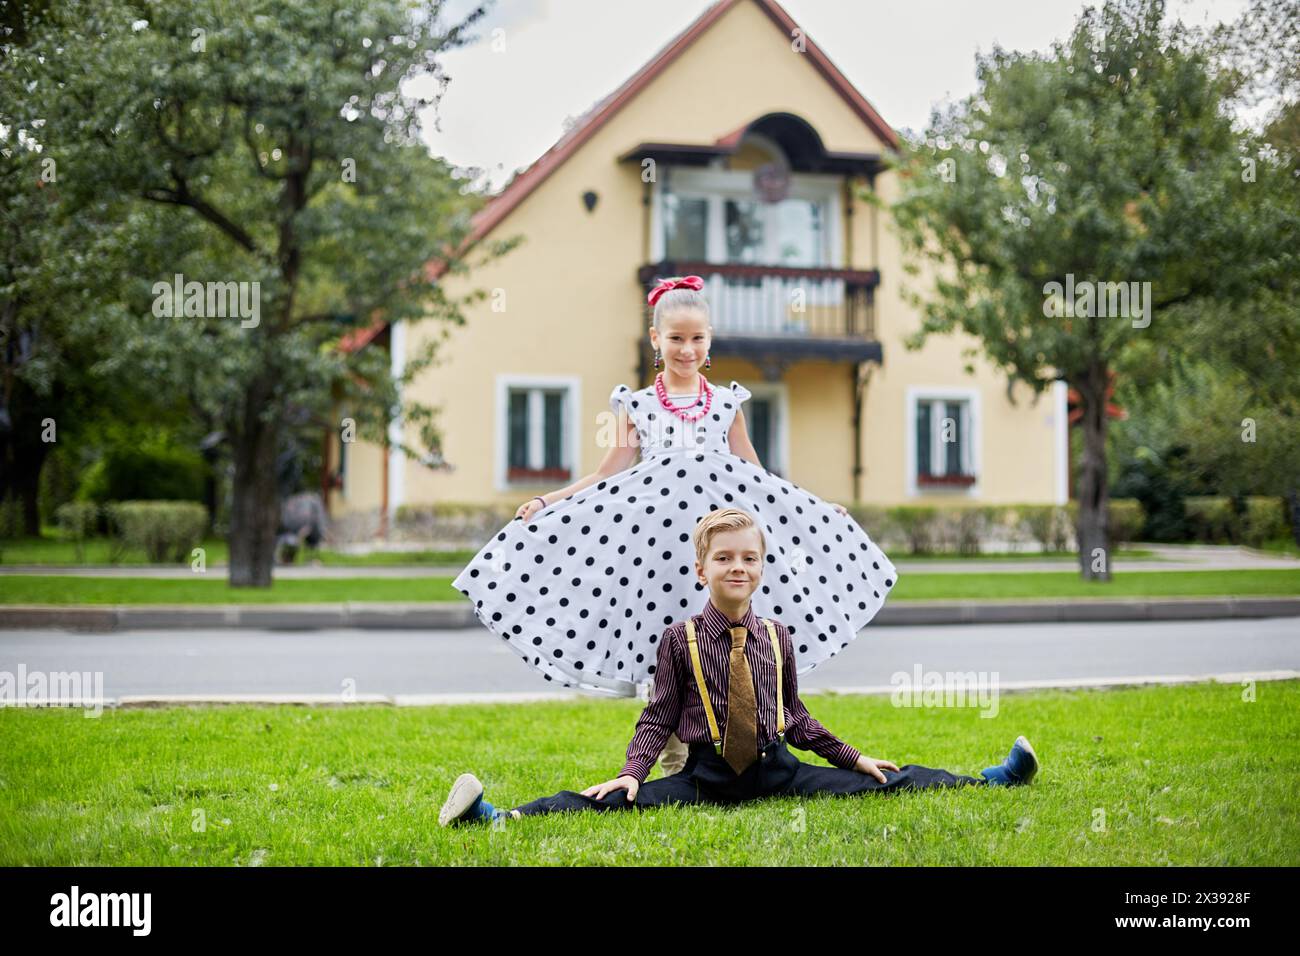 Smiling boy sits on side split and girl in polka-dotted dress stands behind him on grassy lawn against two-storied house. Stock Photo